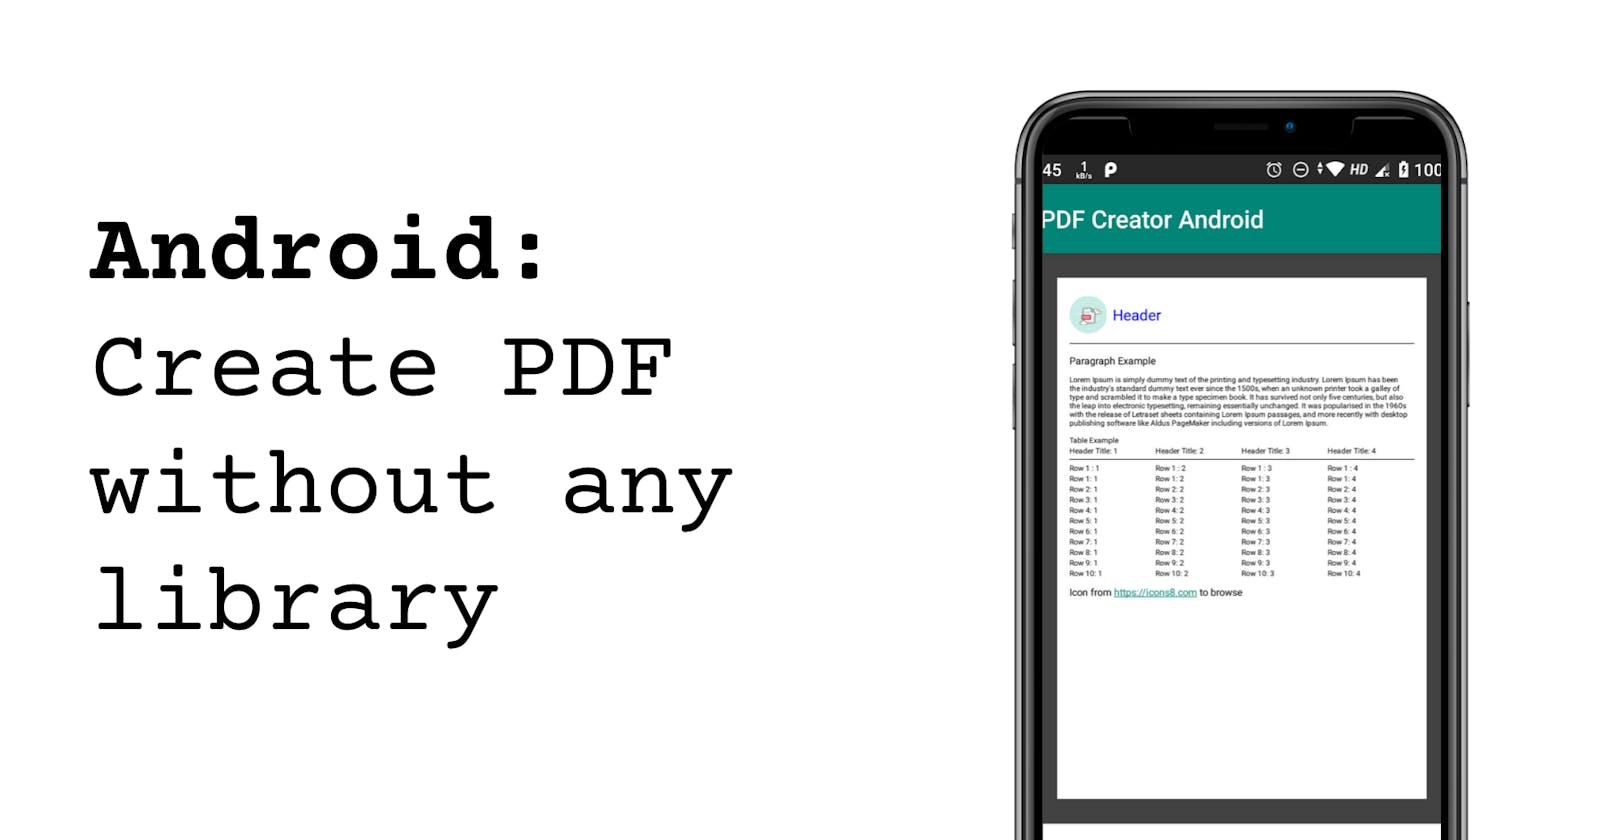 Android: Create PDF without any library [Part 2]